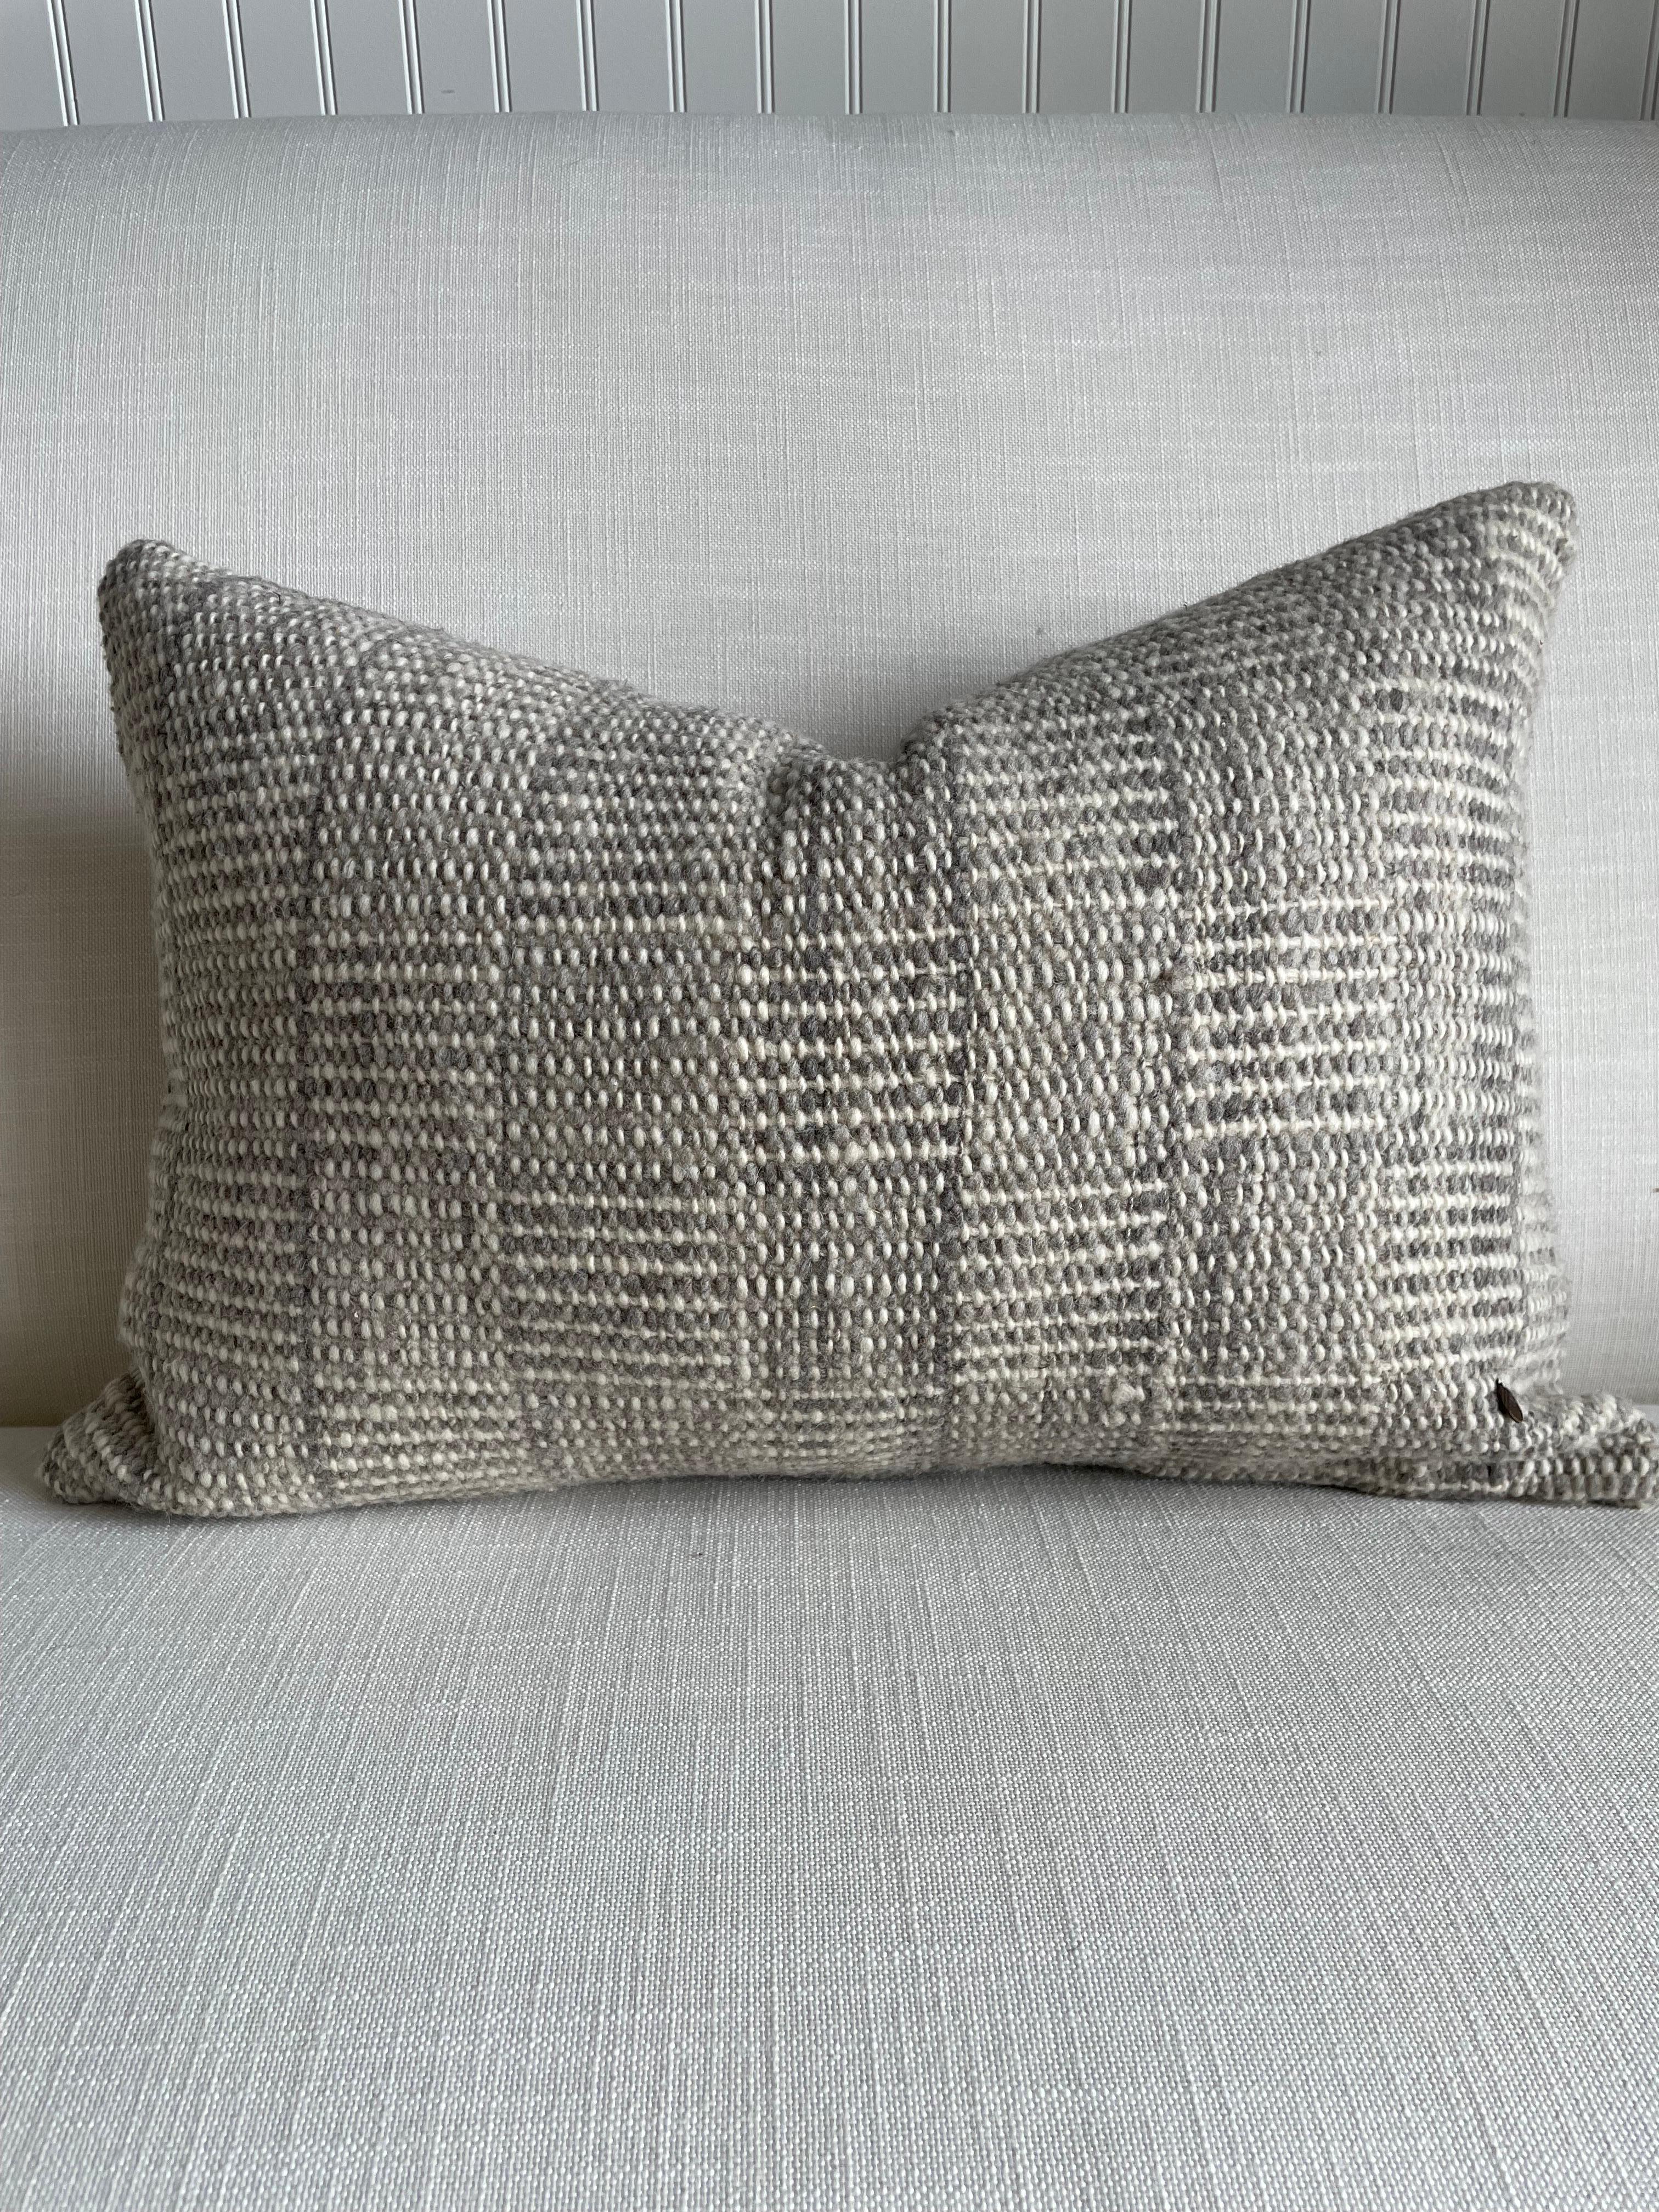 Vinn Organic Wool Lumbar Pillow with Down Insert In New Condition For Sale In Brea, CA